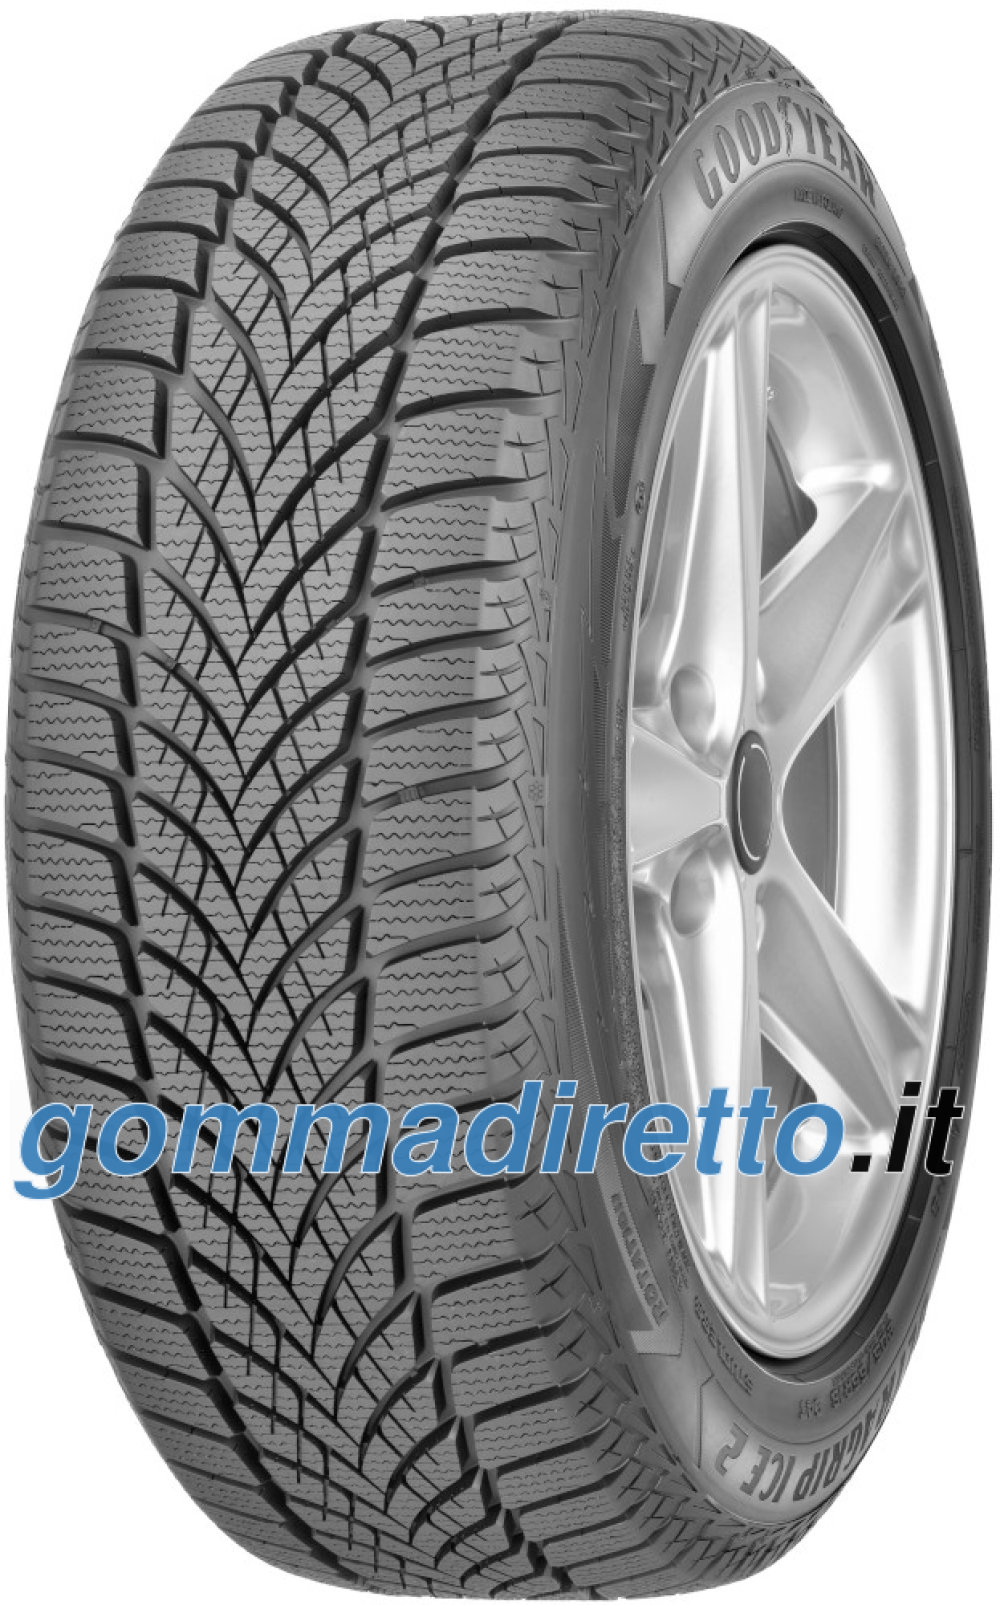 Image of Goodyear UltraGrip Ice 2 ( 245/45 R17 99T XL EVR, Nordic compound )